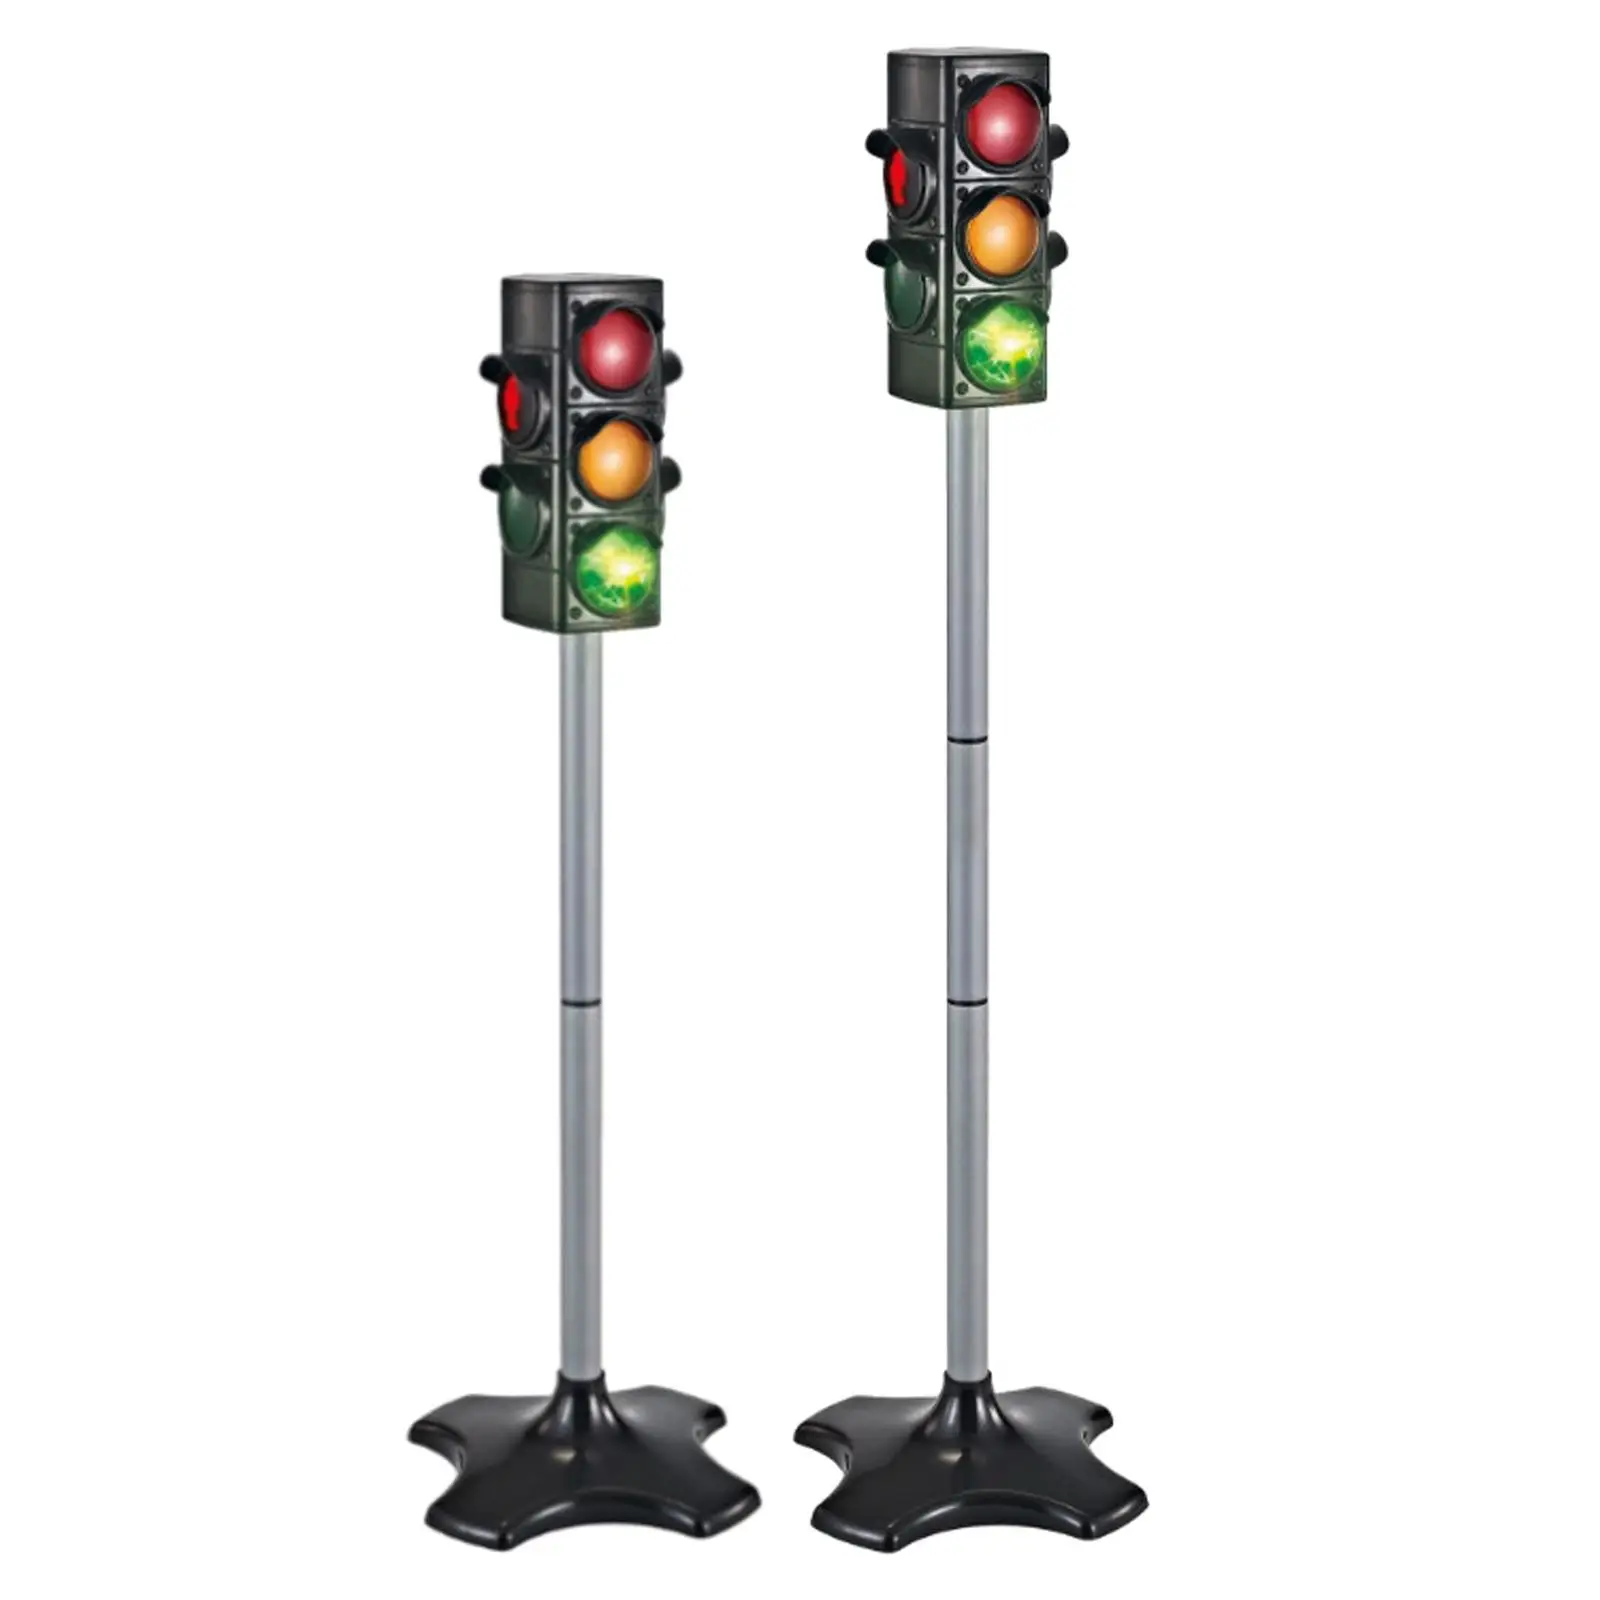 Simulation Traffic Light Model w/ Sound and Light Traffic Rule Cognition Early Education Child Pretend Play Preschool Toy Props